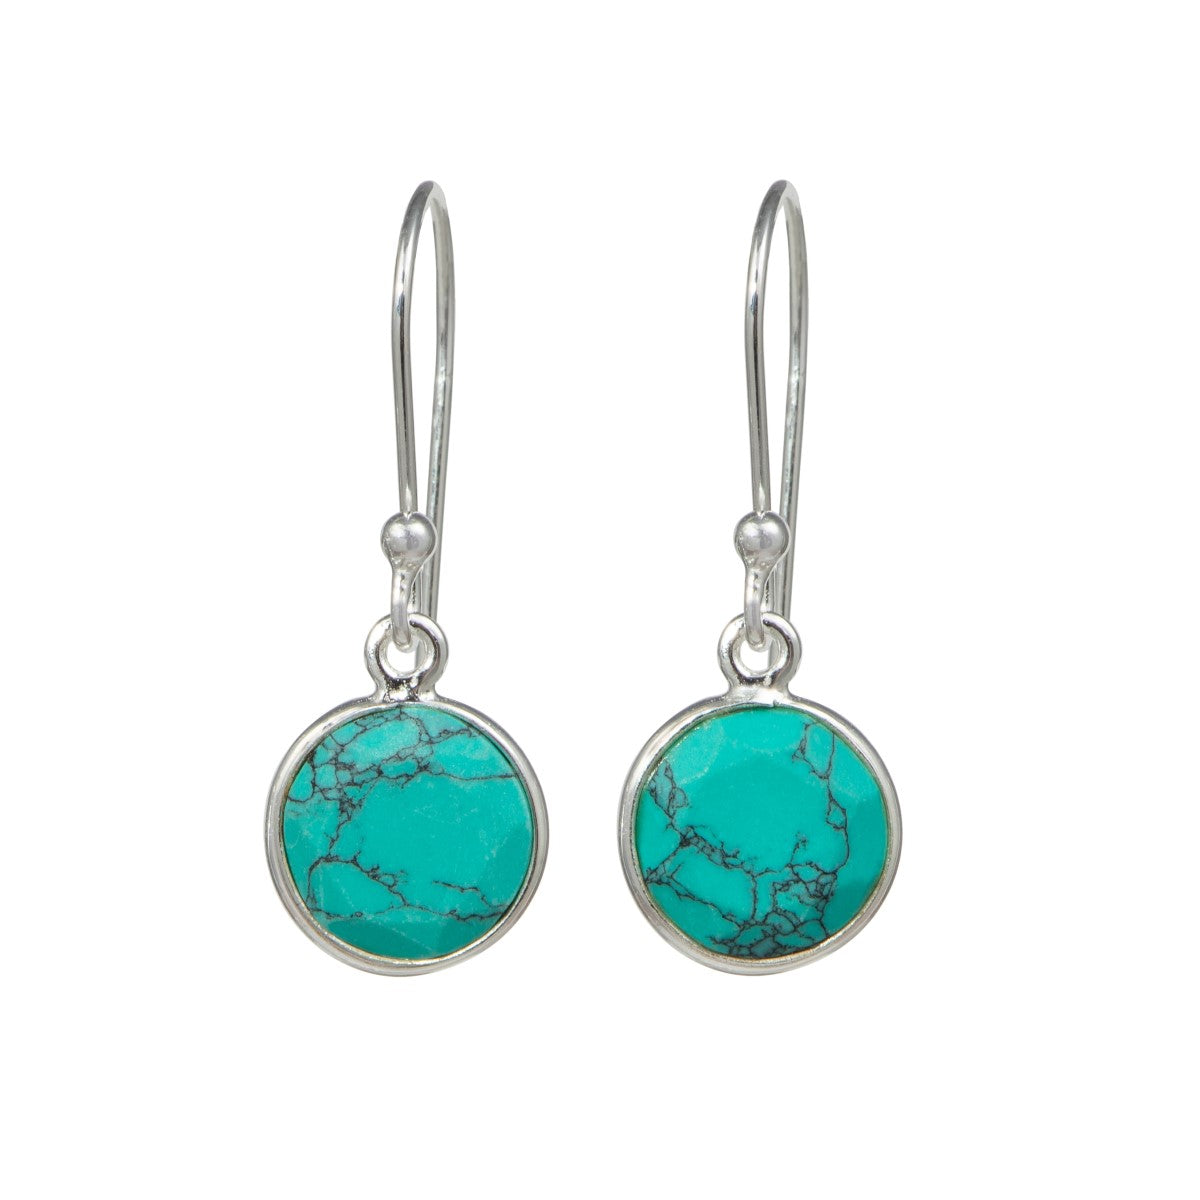 Turquoise Sterling Silver Earrings with a Round Faceted Gemstone Drop